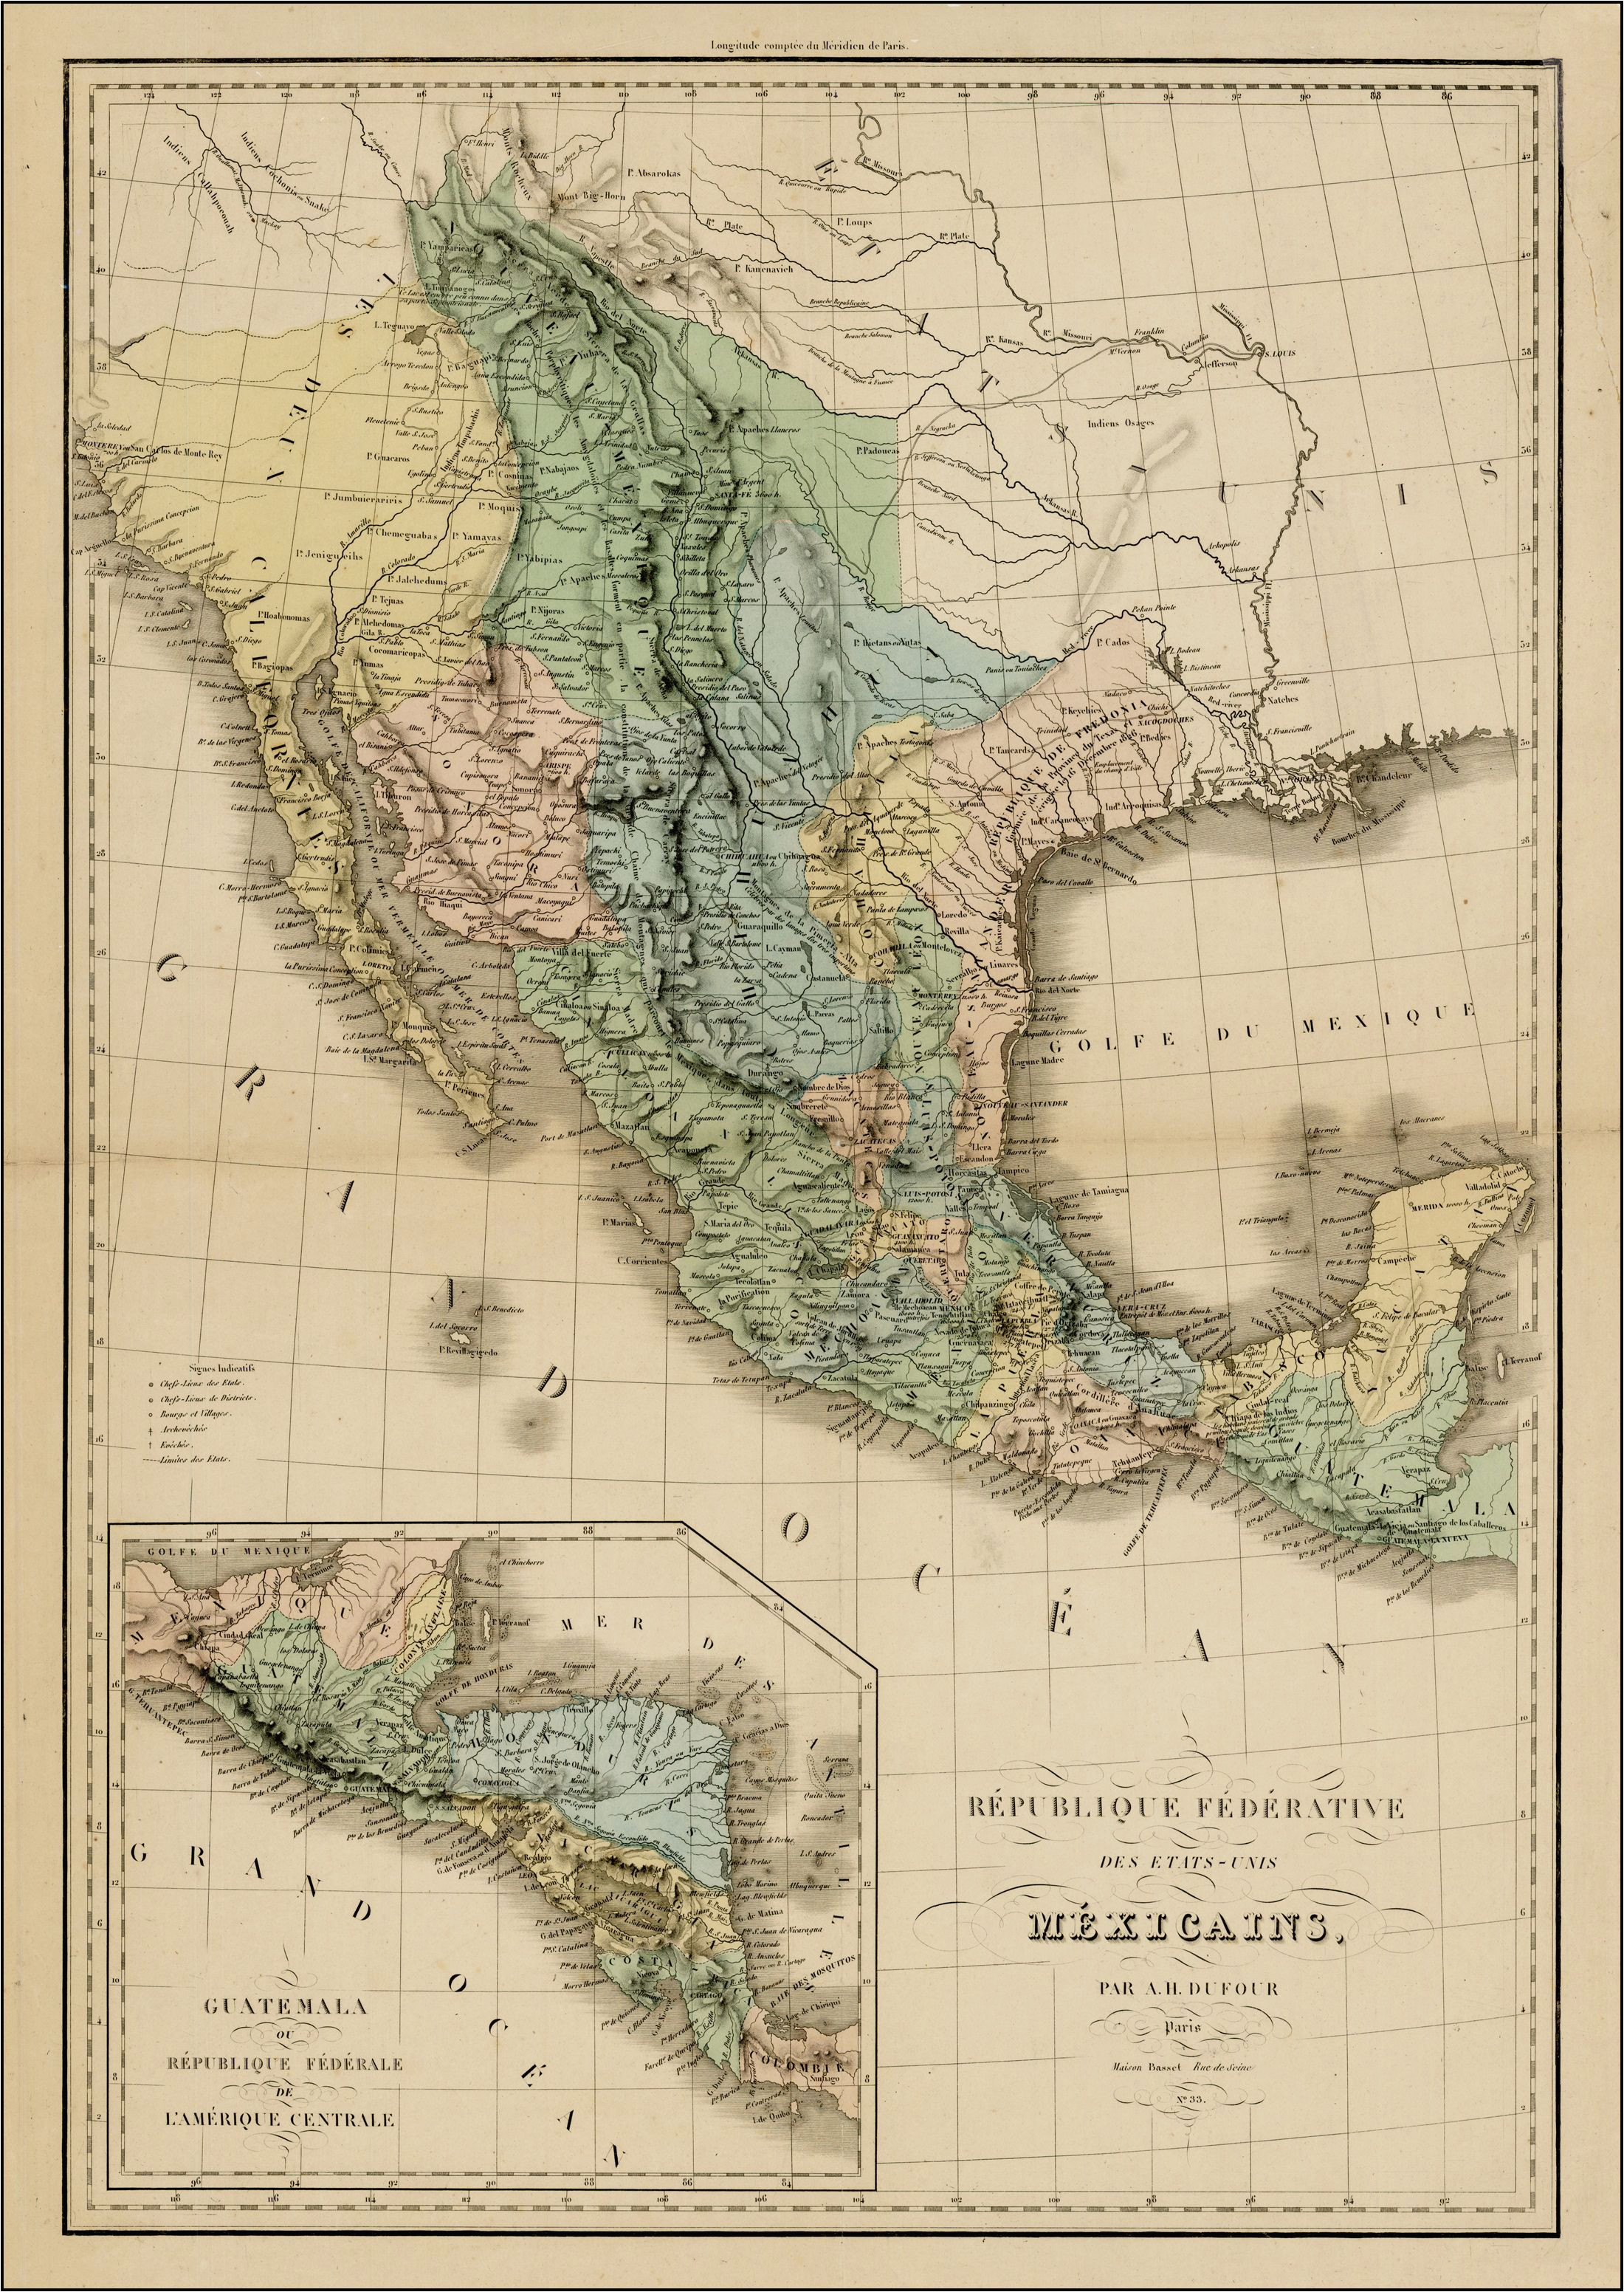 mexico and the republic of fredonia retronaut weird and wicked